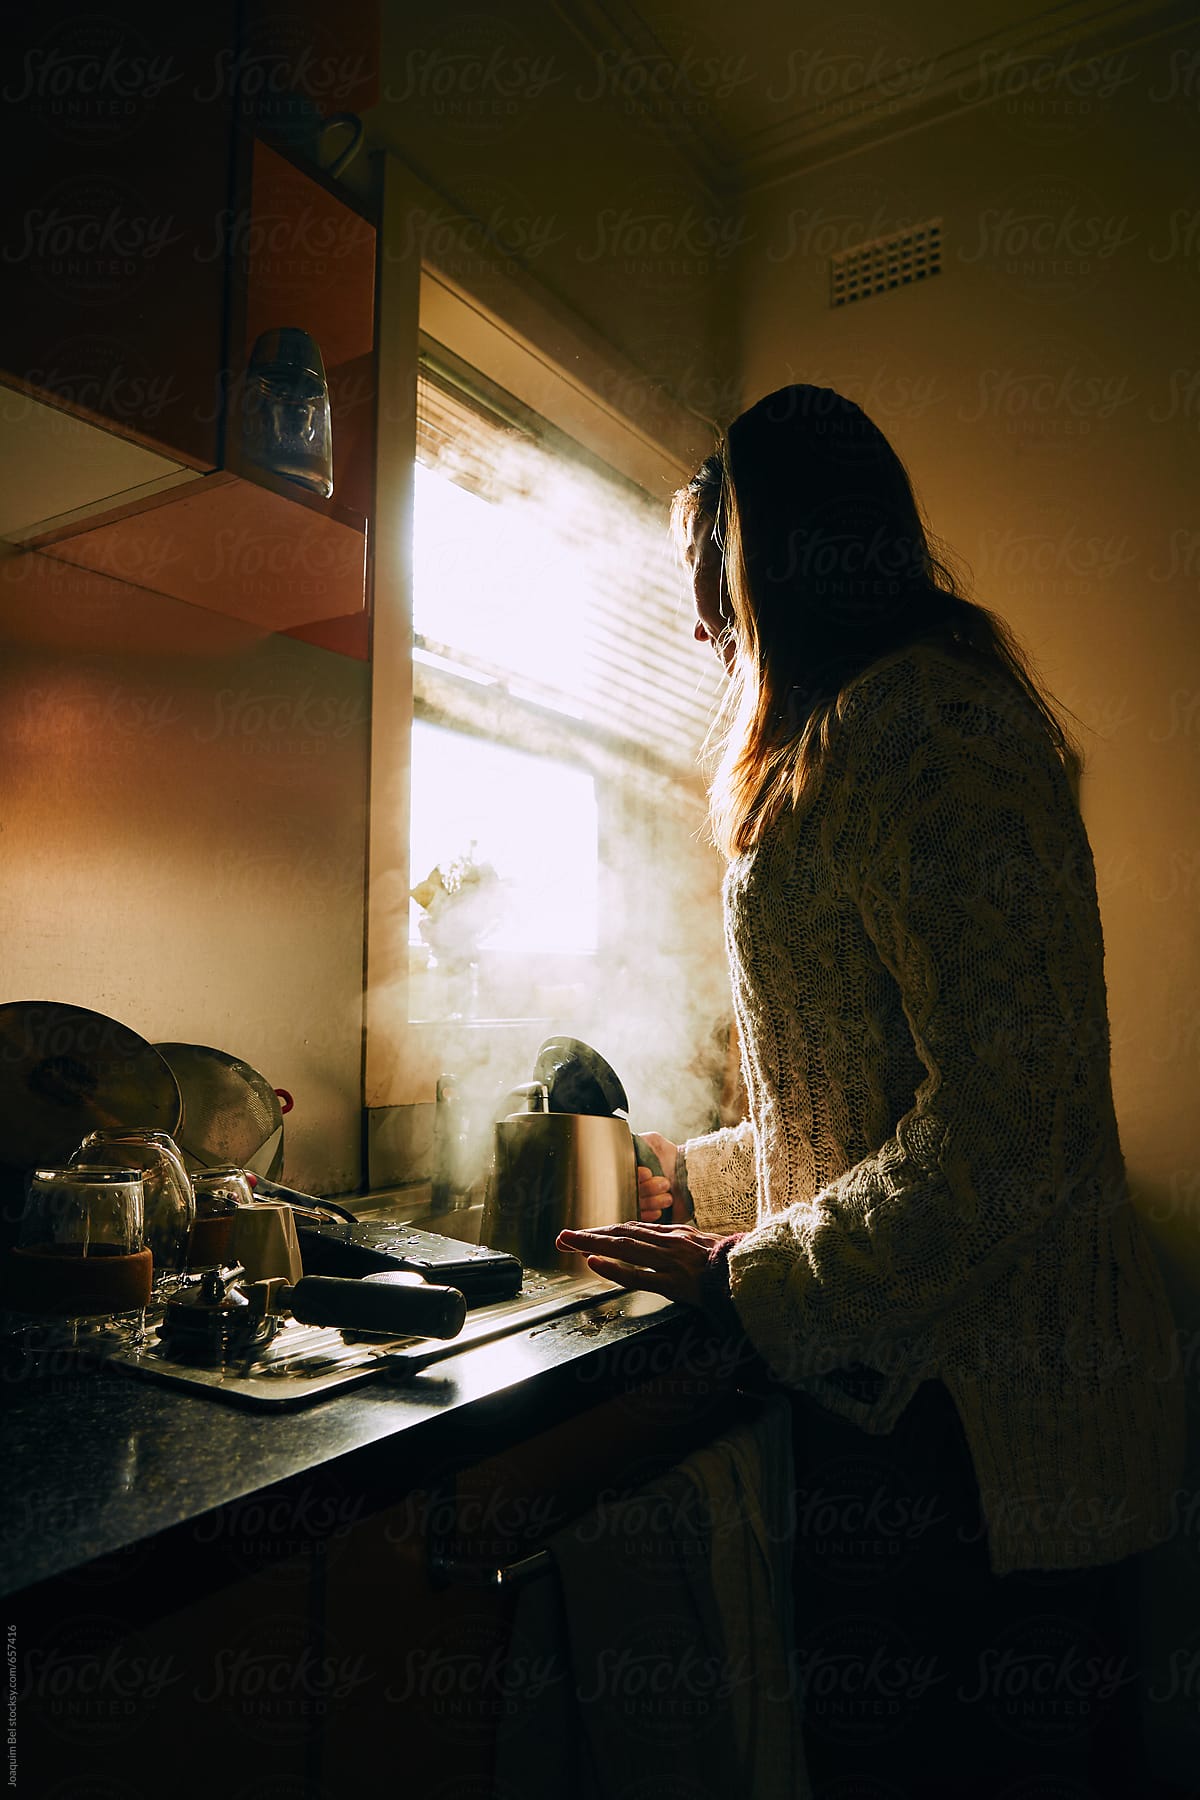 Woman filling a kettle in a kitchen.